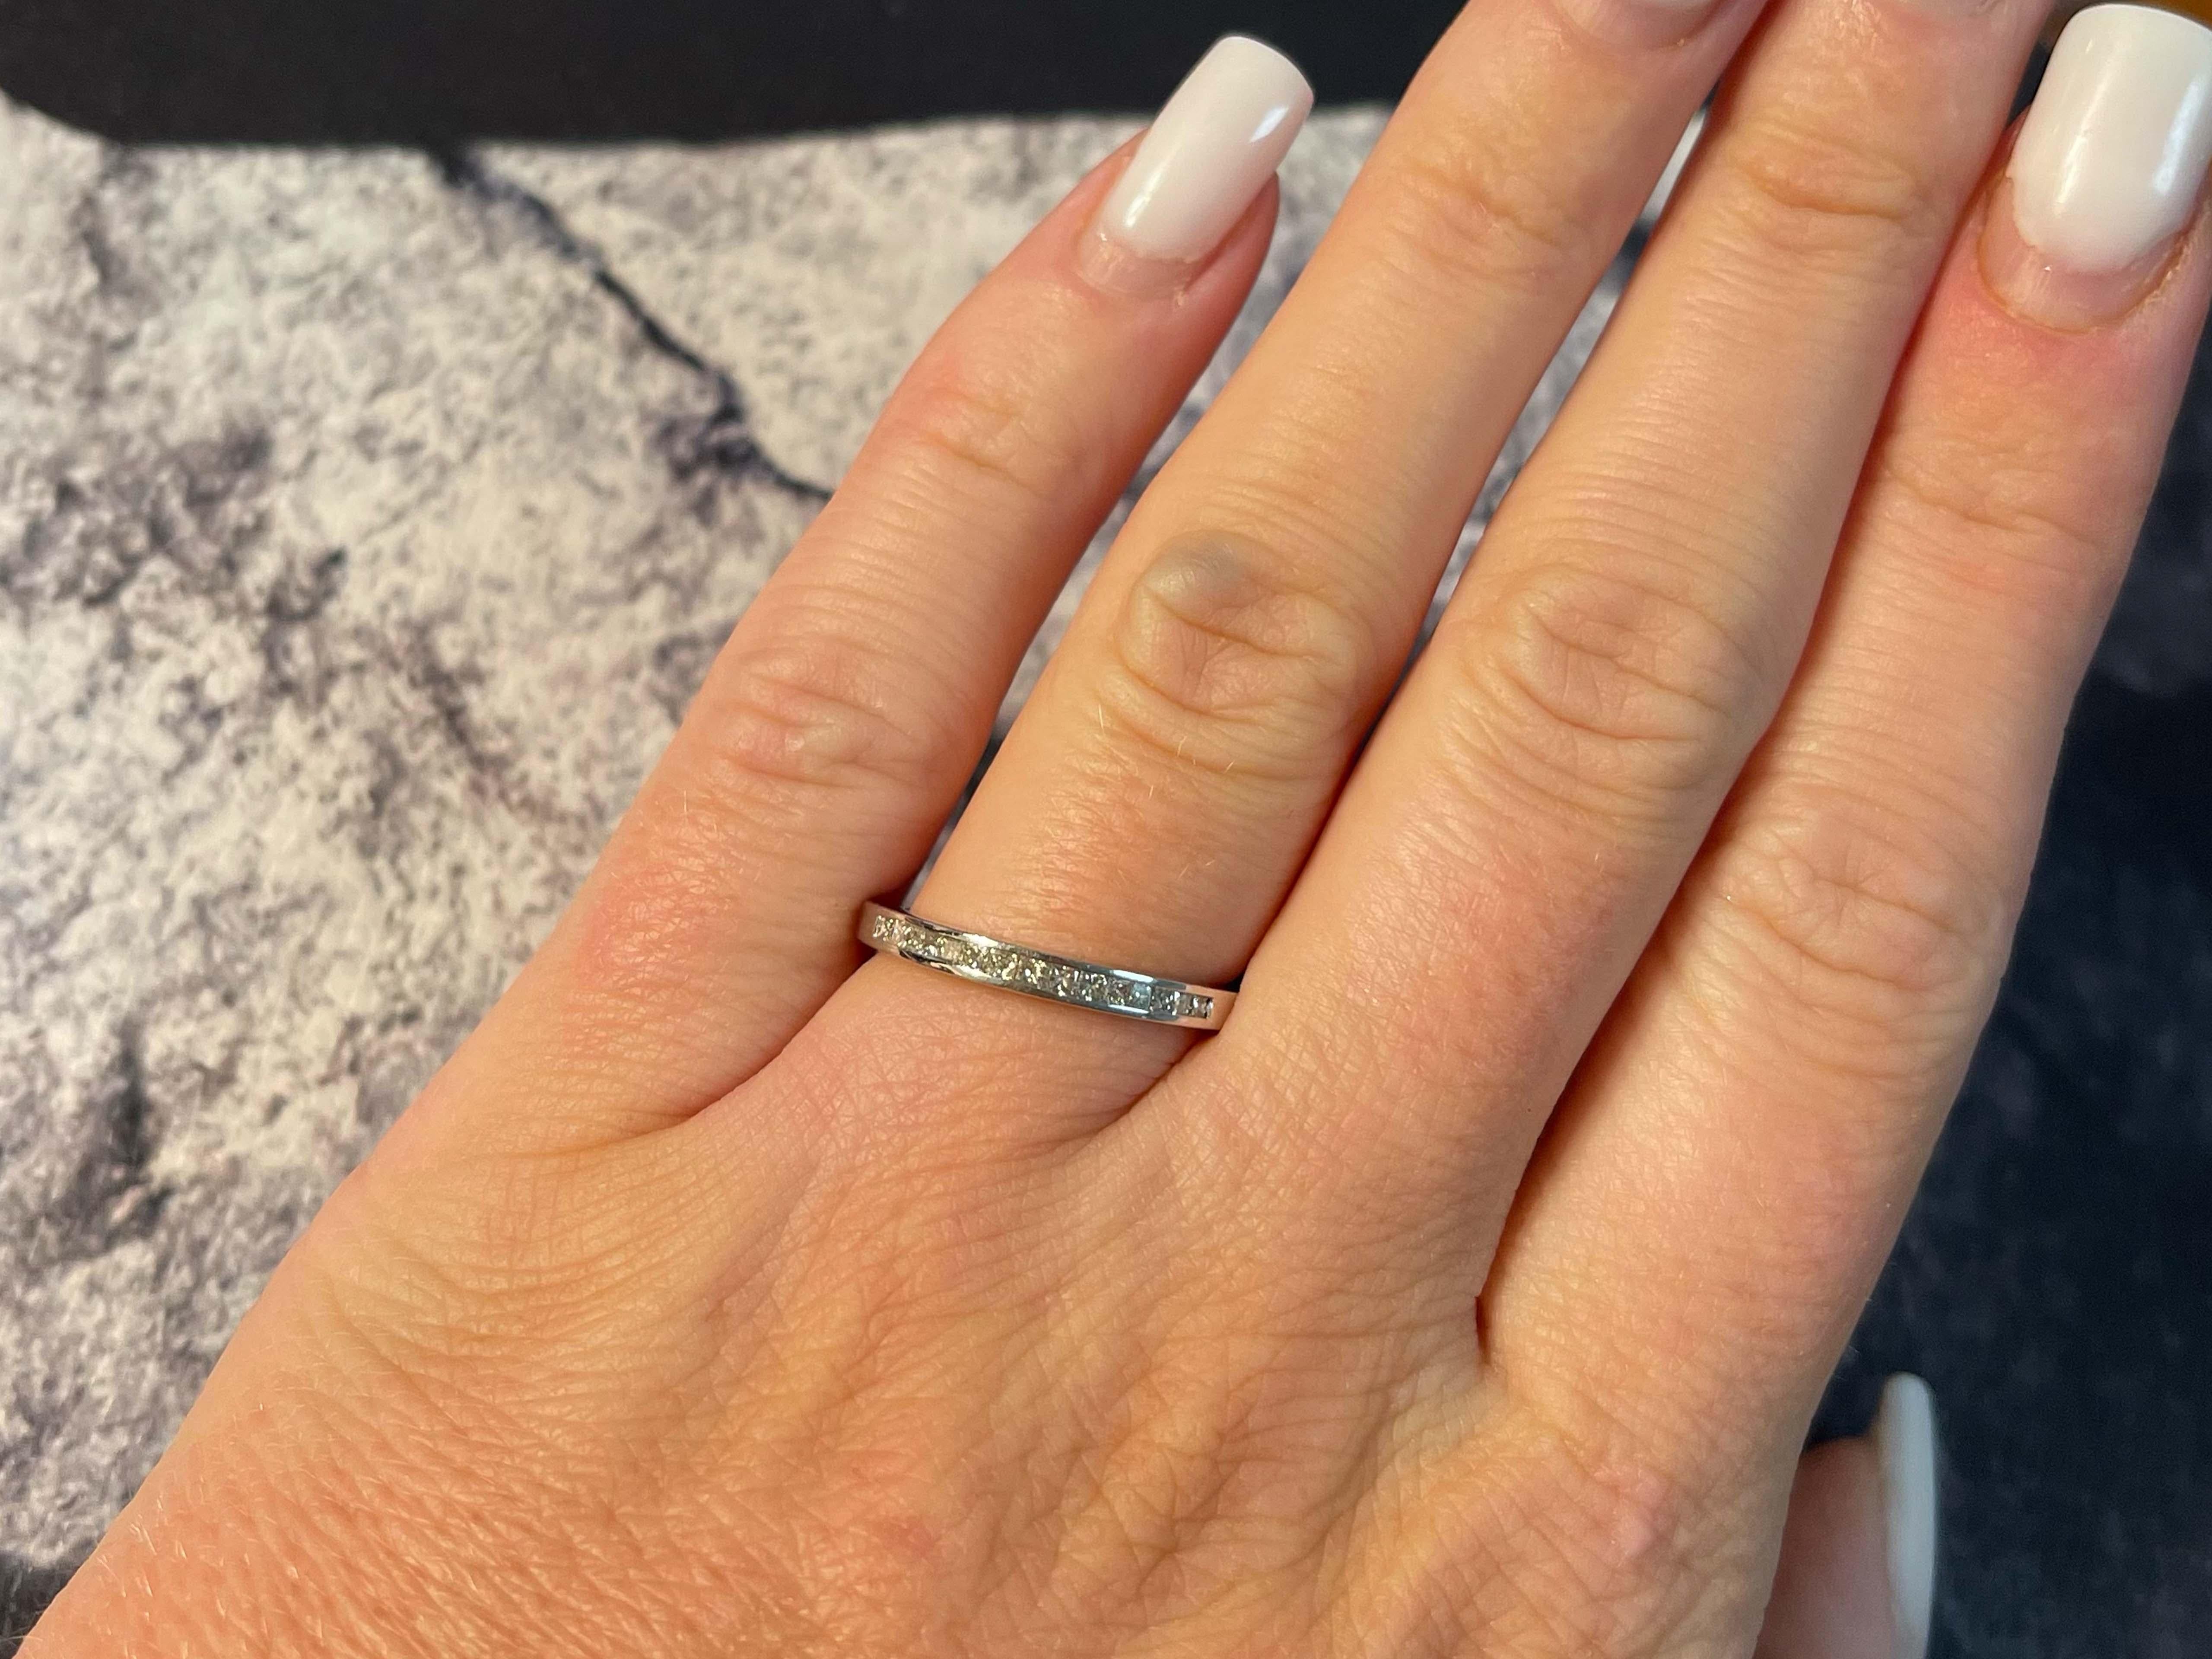 Item Specifications:

Metal: 14k White Gold

Diamond Count: 15 princess cut

Total Diamond Carat Weight: 0.36 carats 

Diamond Color: H

Diamond Clarity: SI

Ring Size: 6.75

Total Weight: 2.4 Grams

Stamped: 